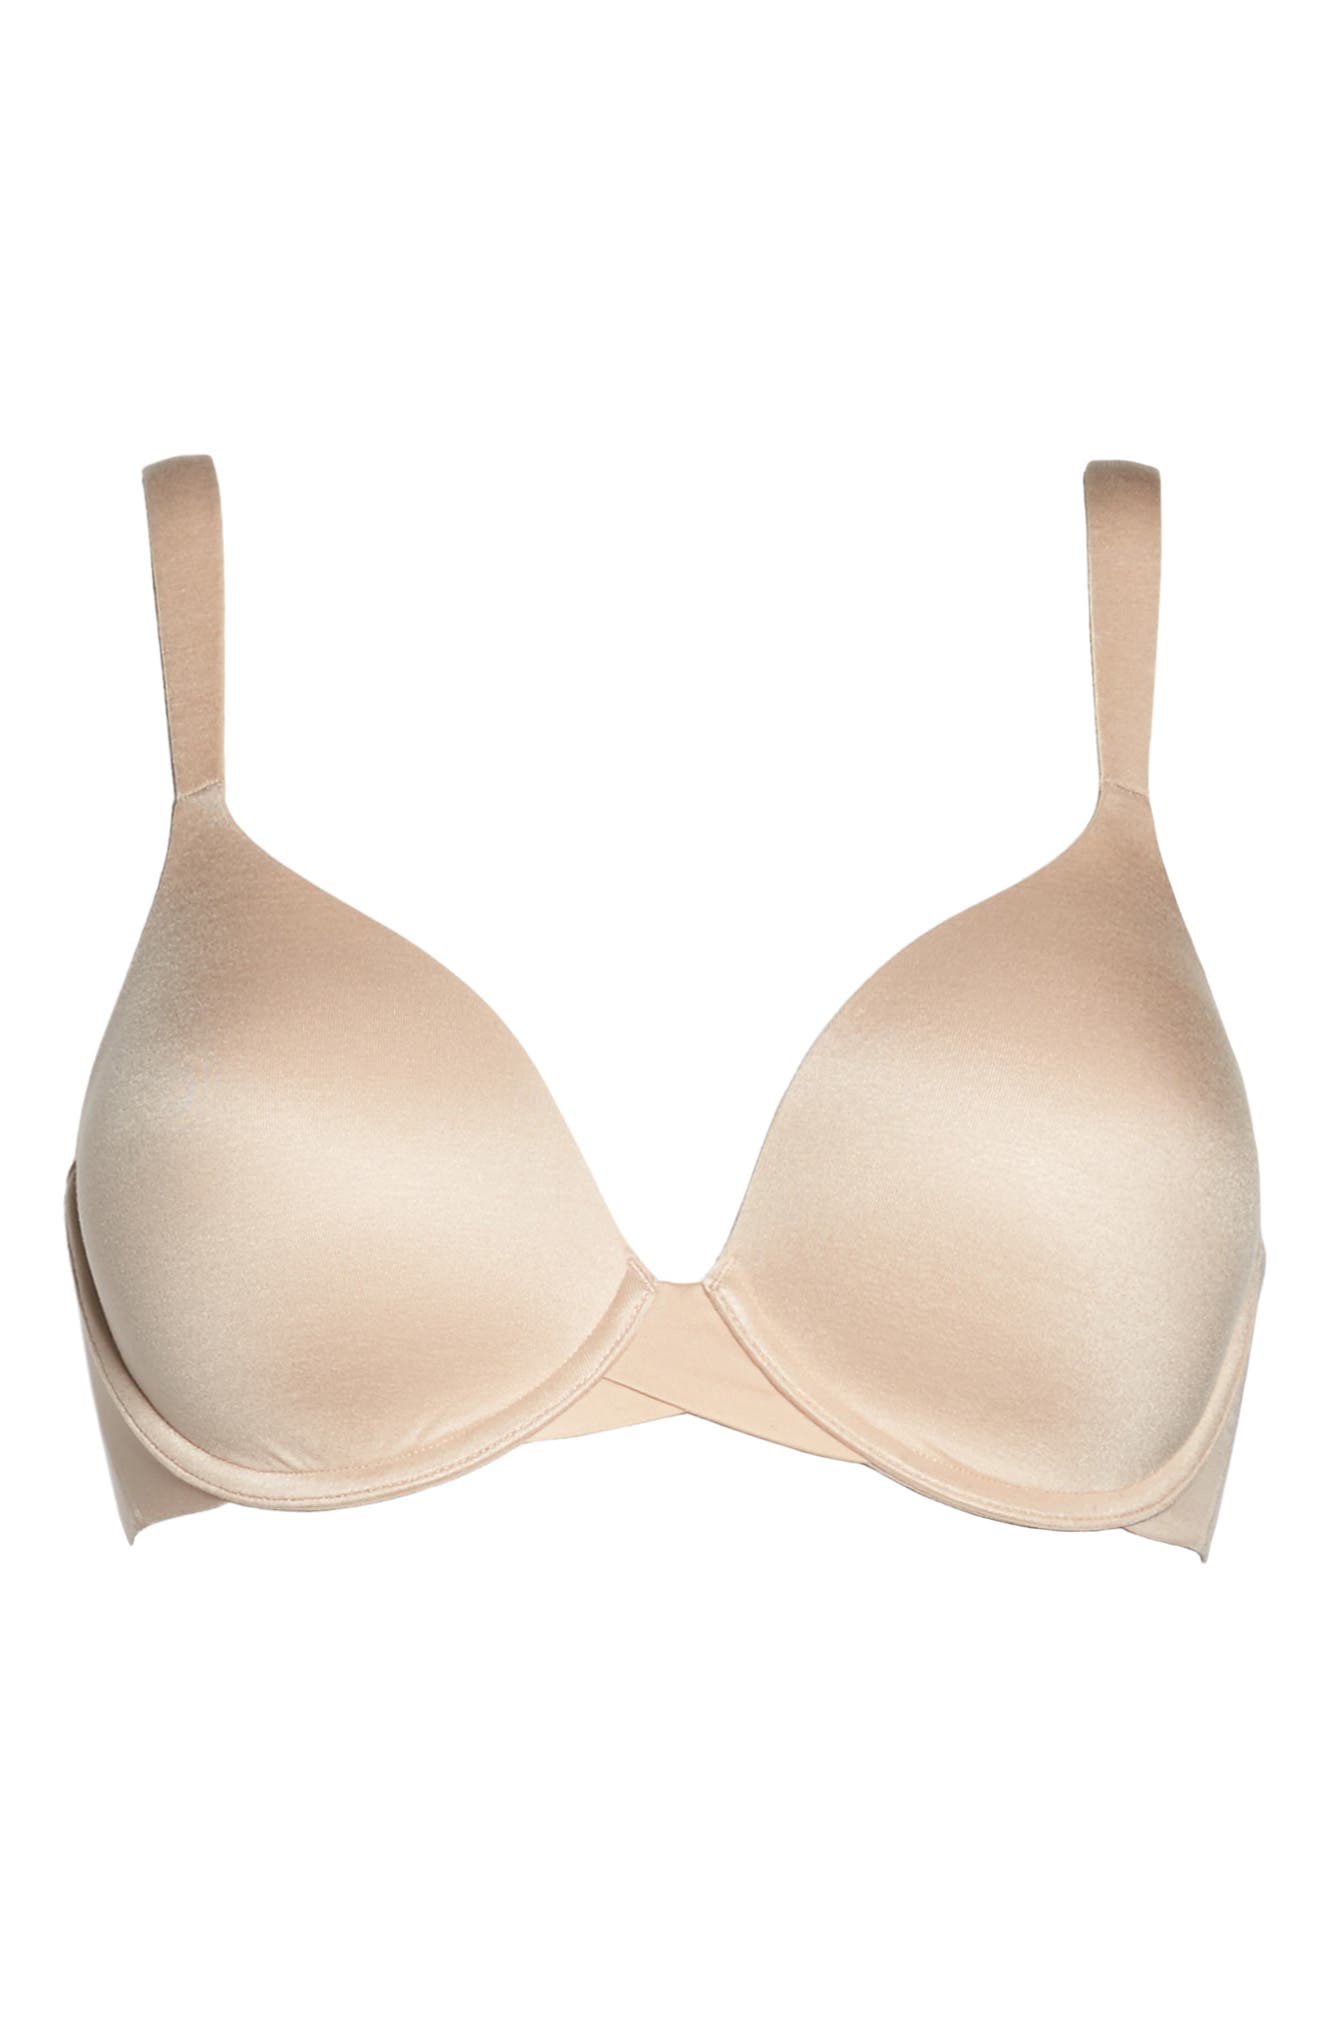 9 Types Of Bras All Women Should Have and Here Is Why - Your Life After 25